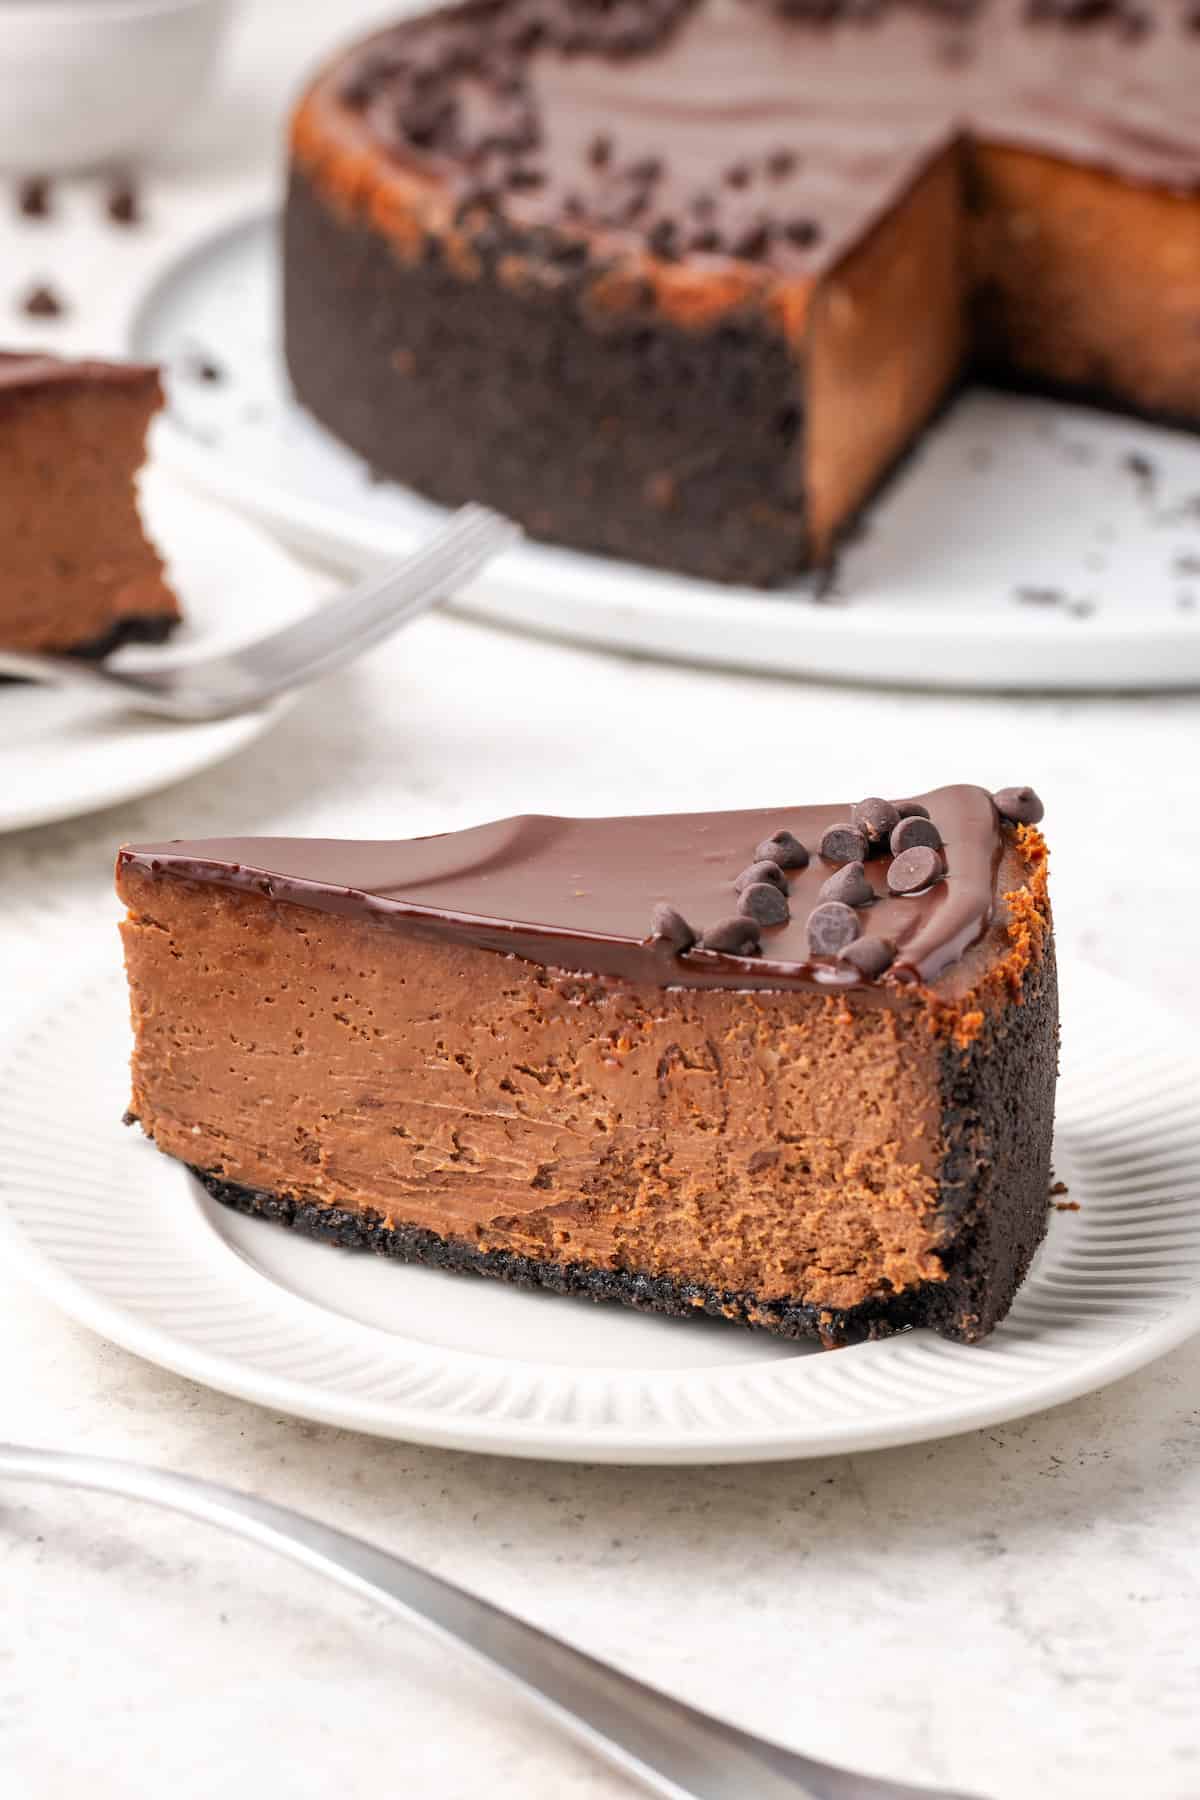 A slice of chocolate cheesecake is shown on a white plate with the cheesecake in the background.